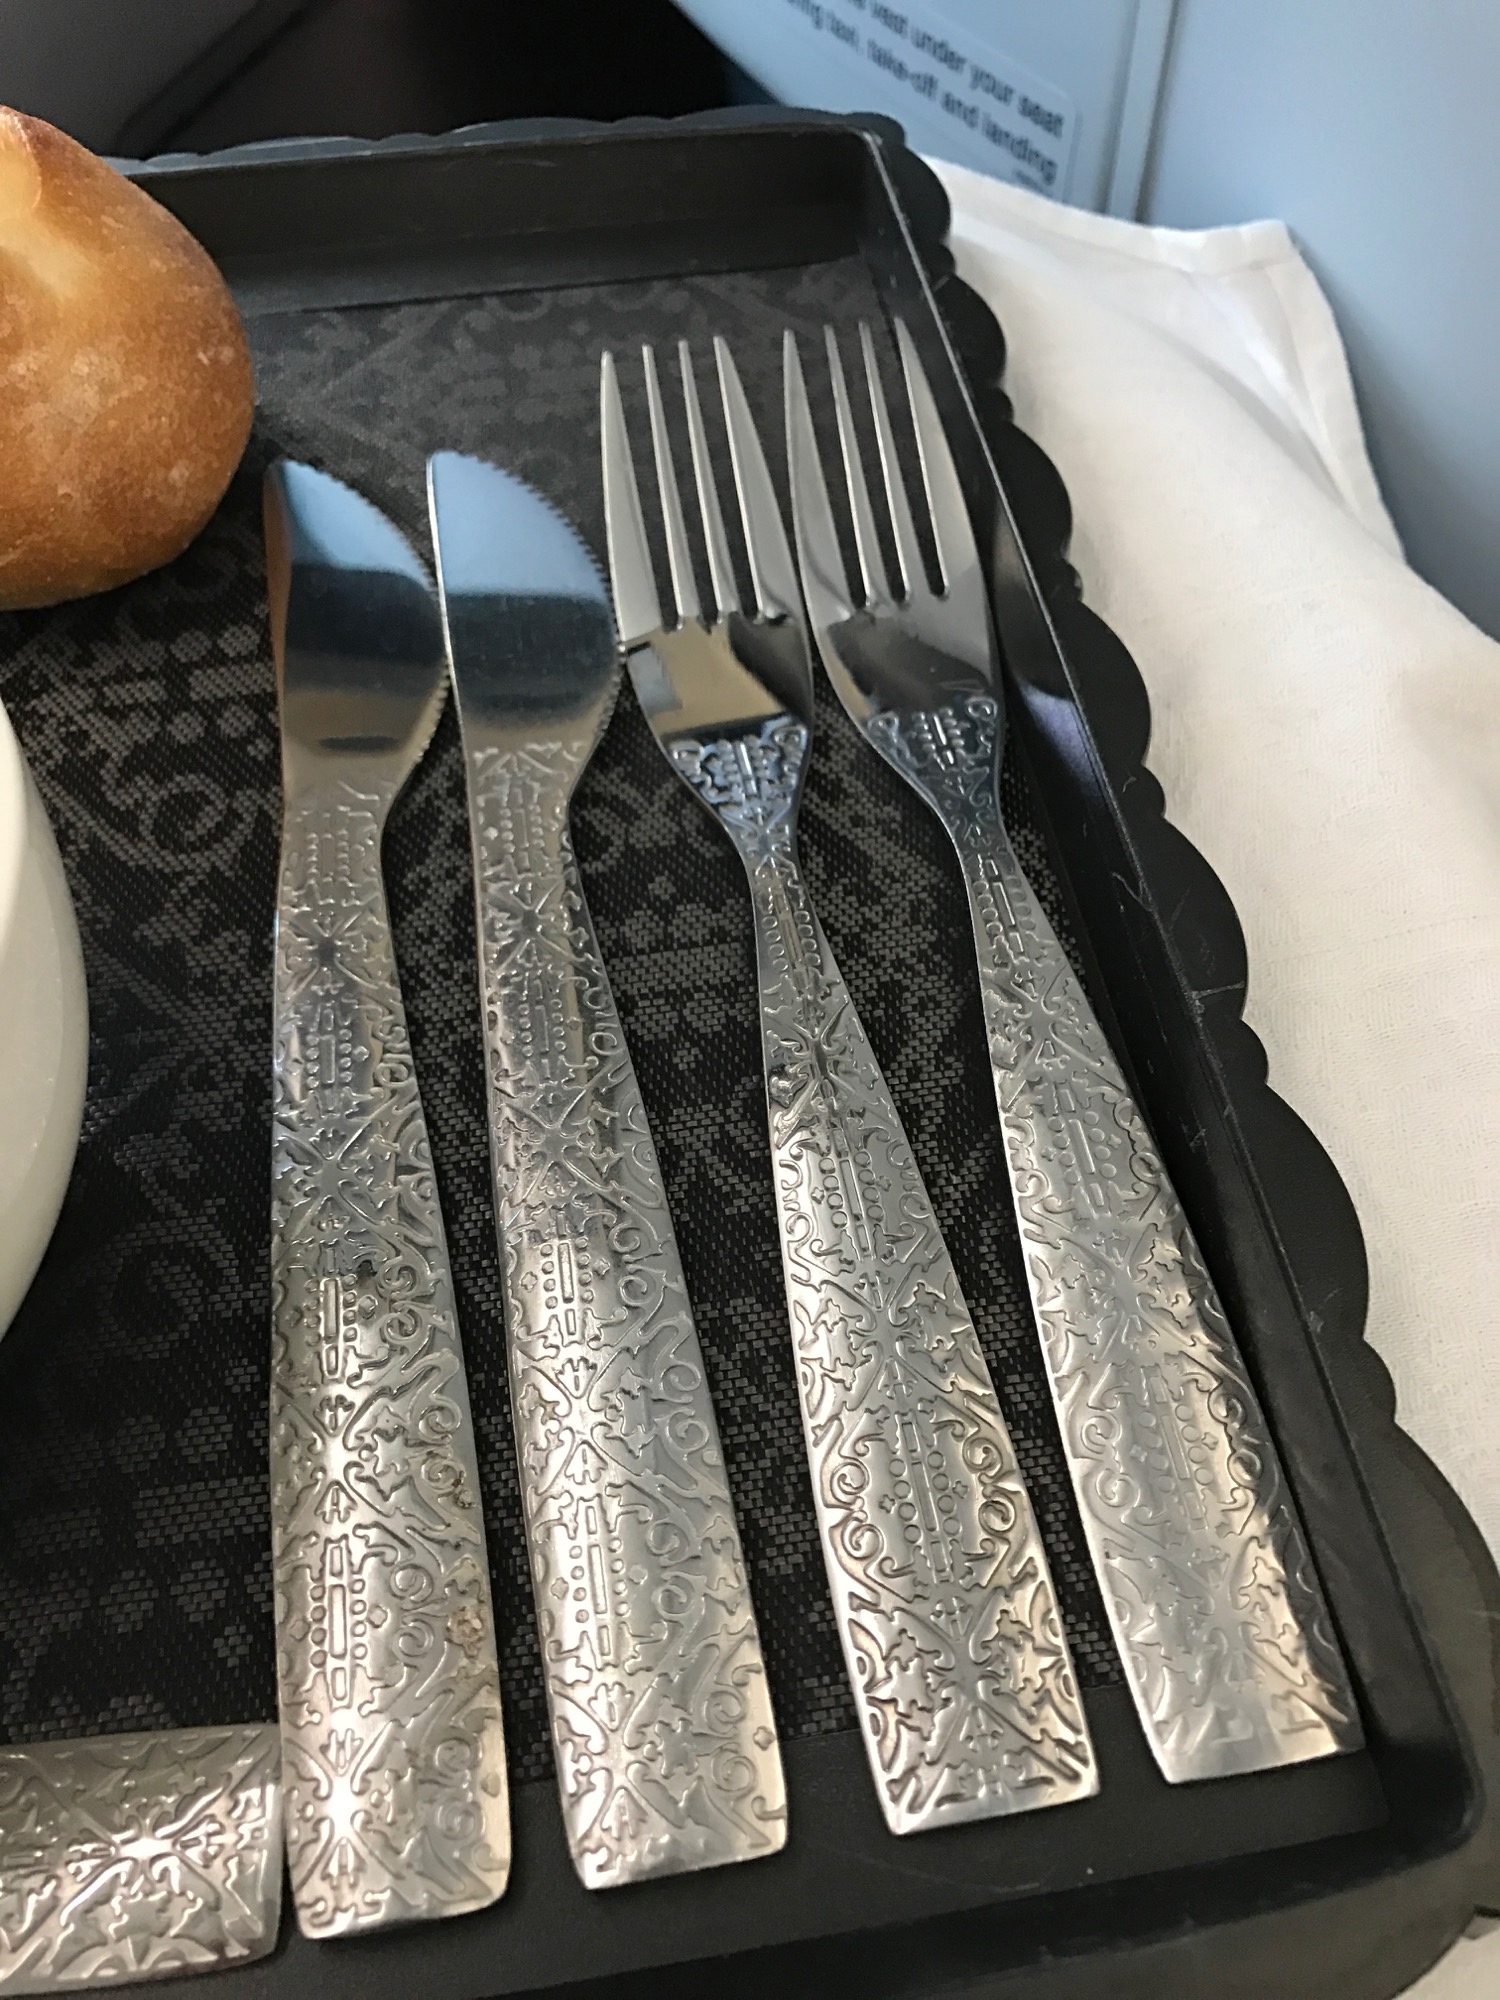 KLM 787 Business Class Review Cutlery - 1